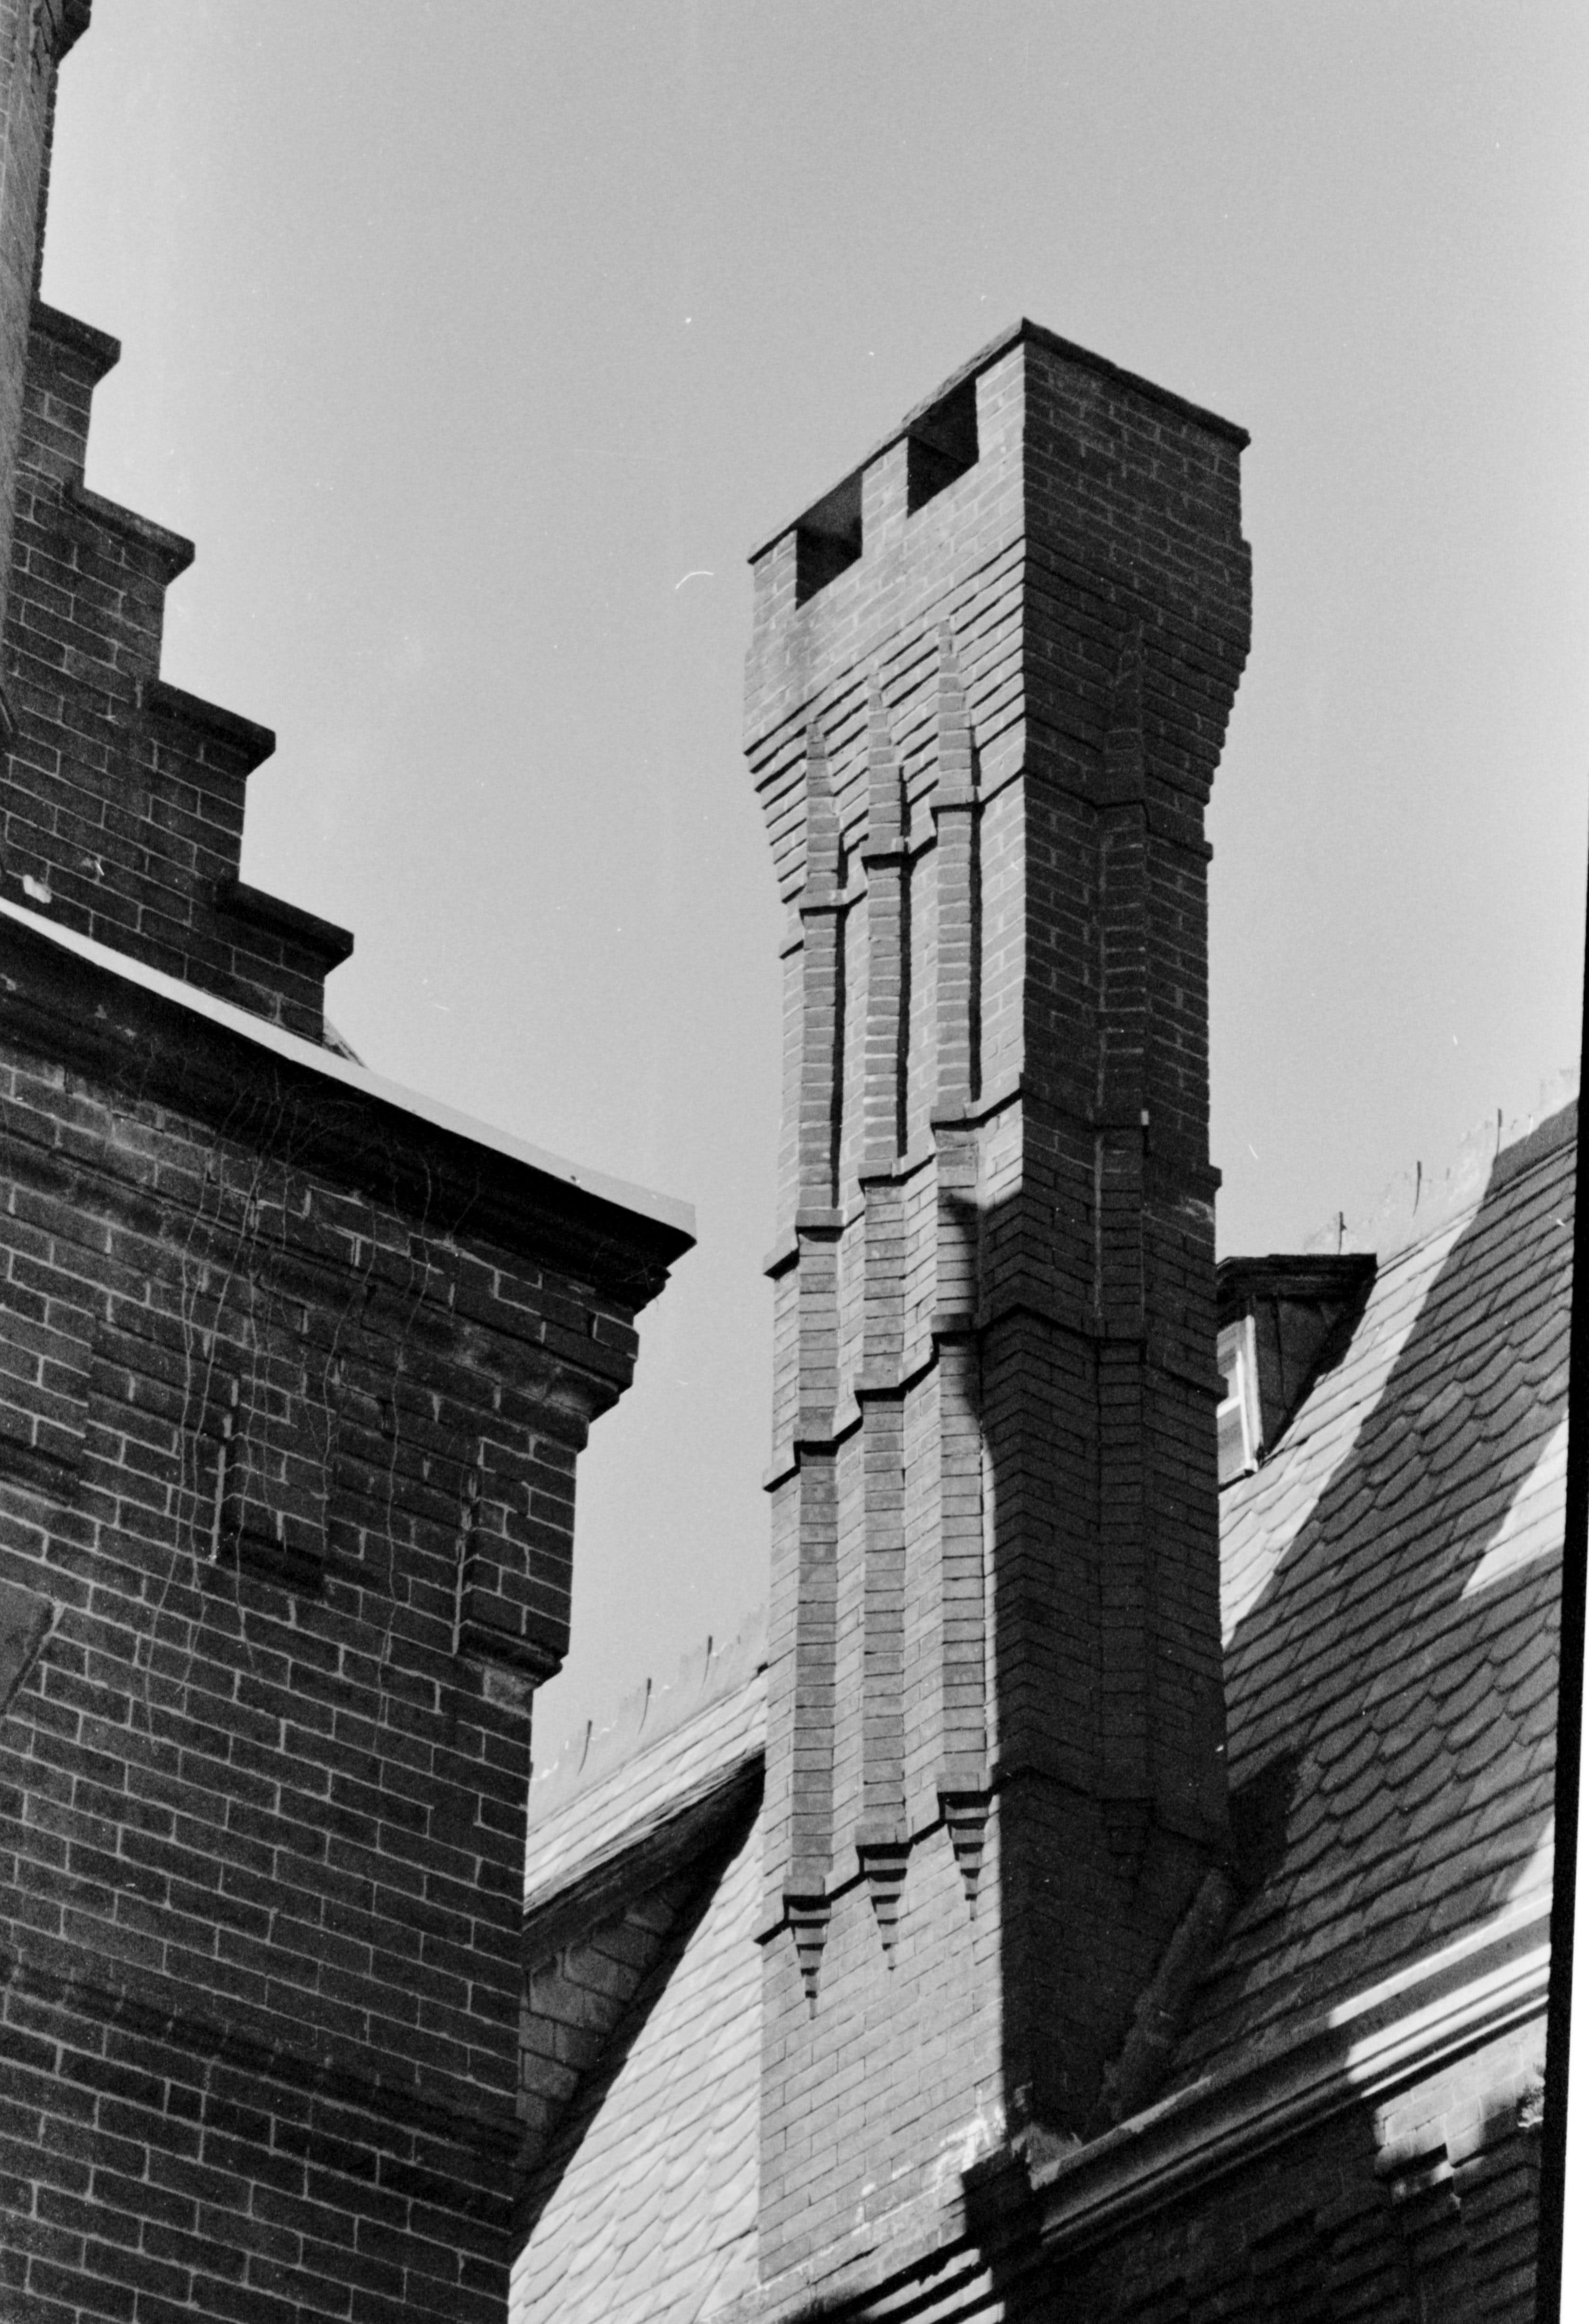 The upper corner of a brick building with a chimney against a clear sky